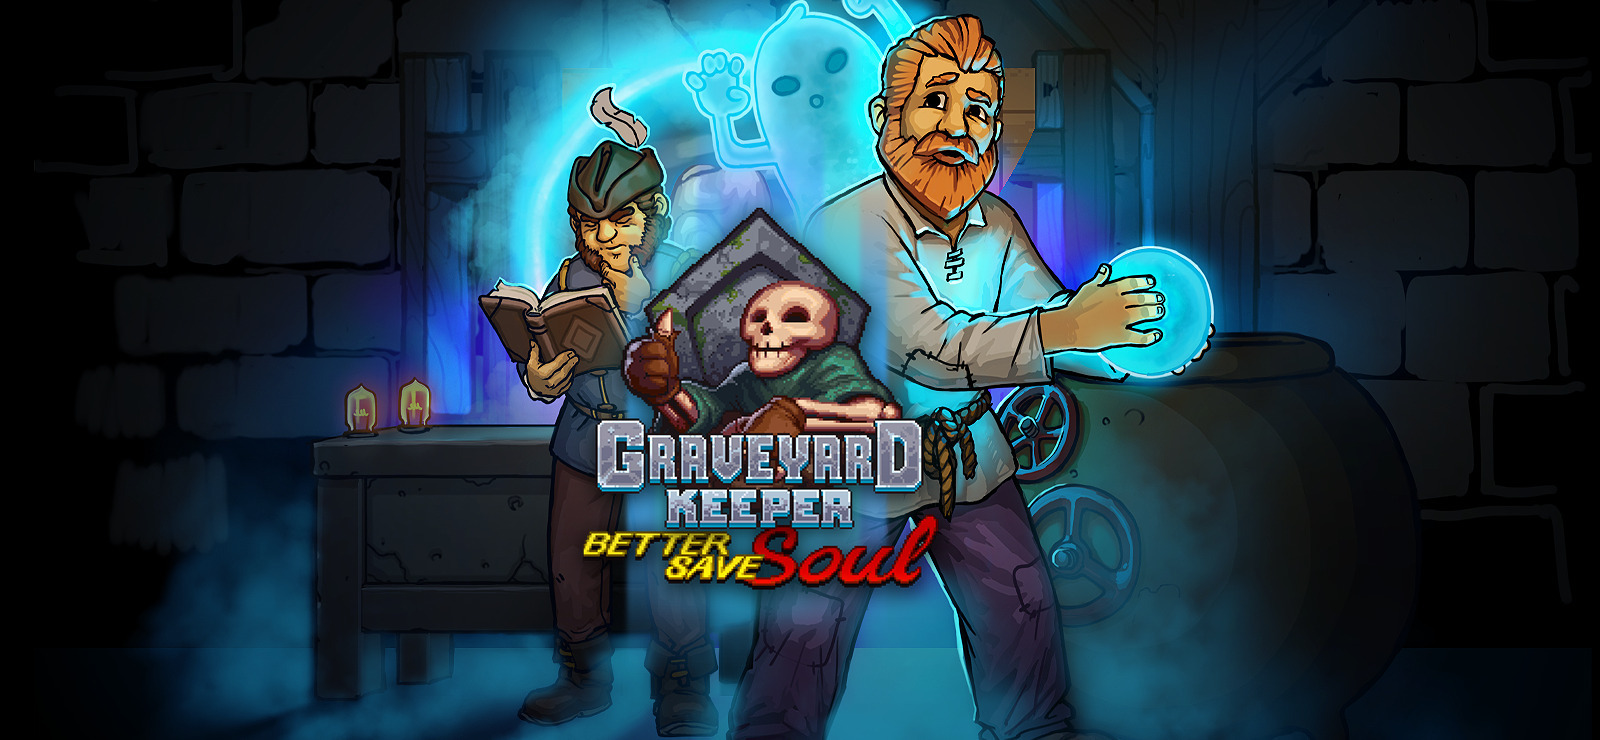 graveyard keeper better save soul xbox one